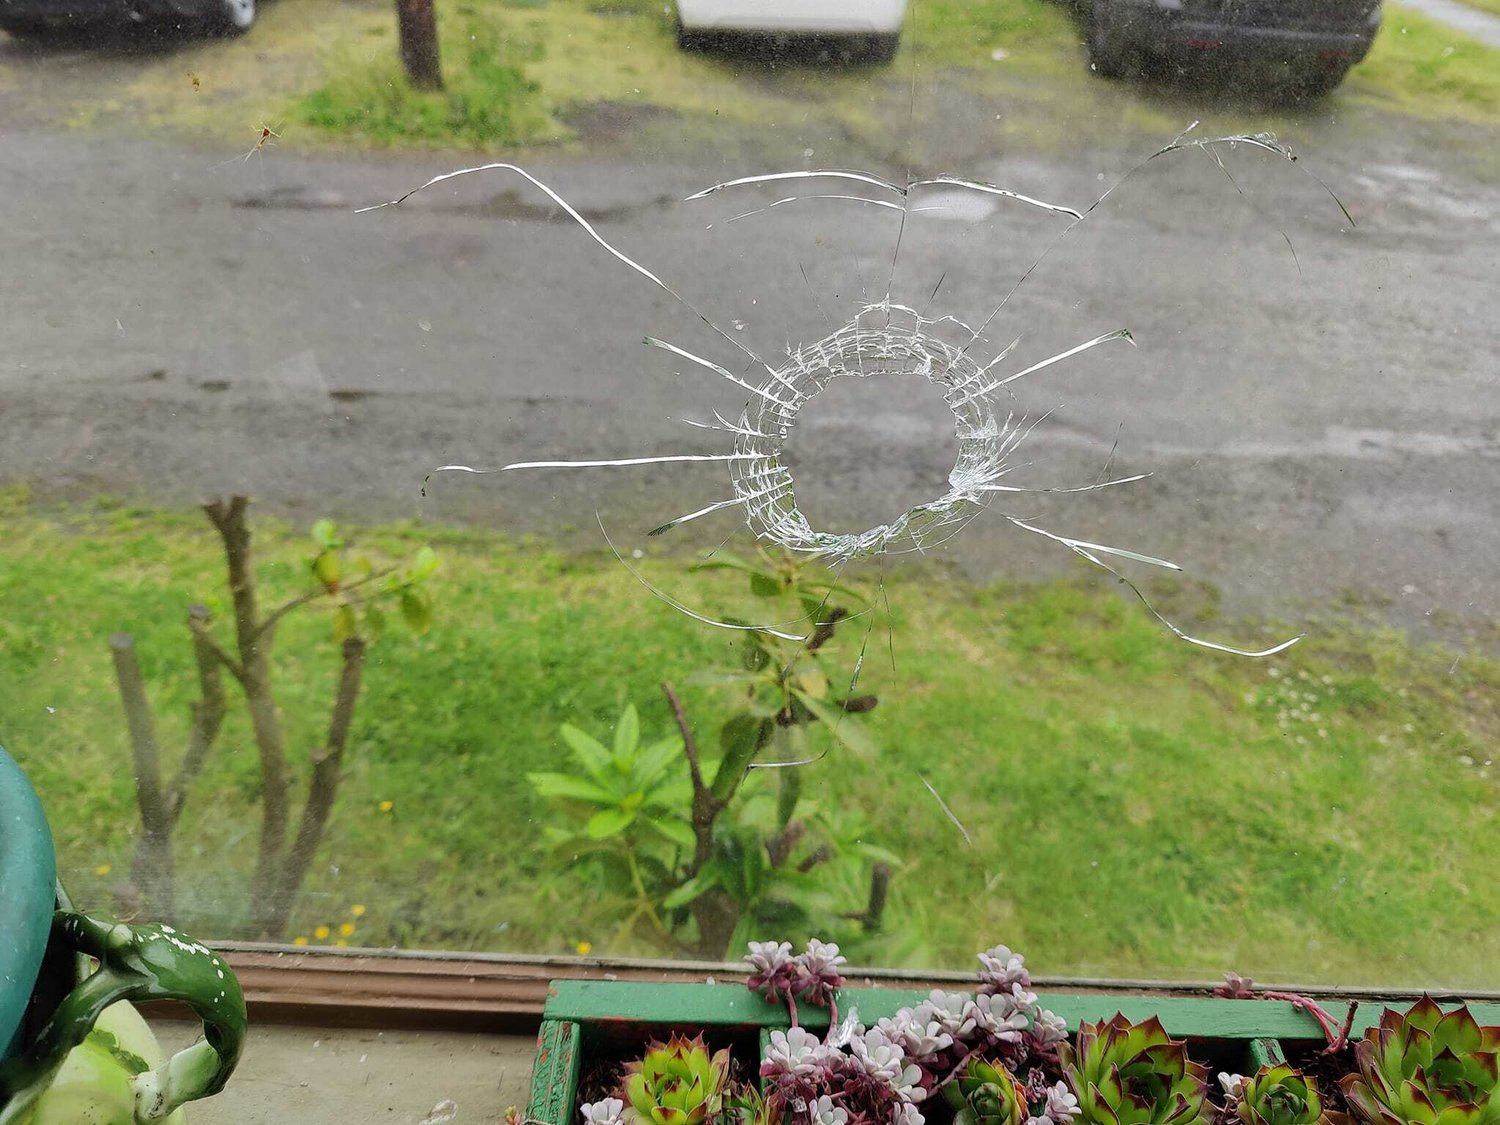 William Kale provided this photo of a bullet hole in the window of his home on North Washington Avenue.